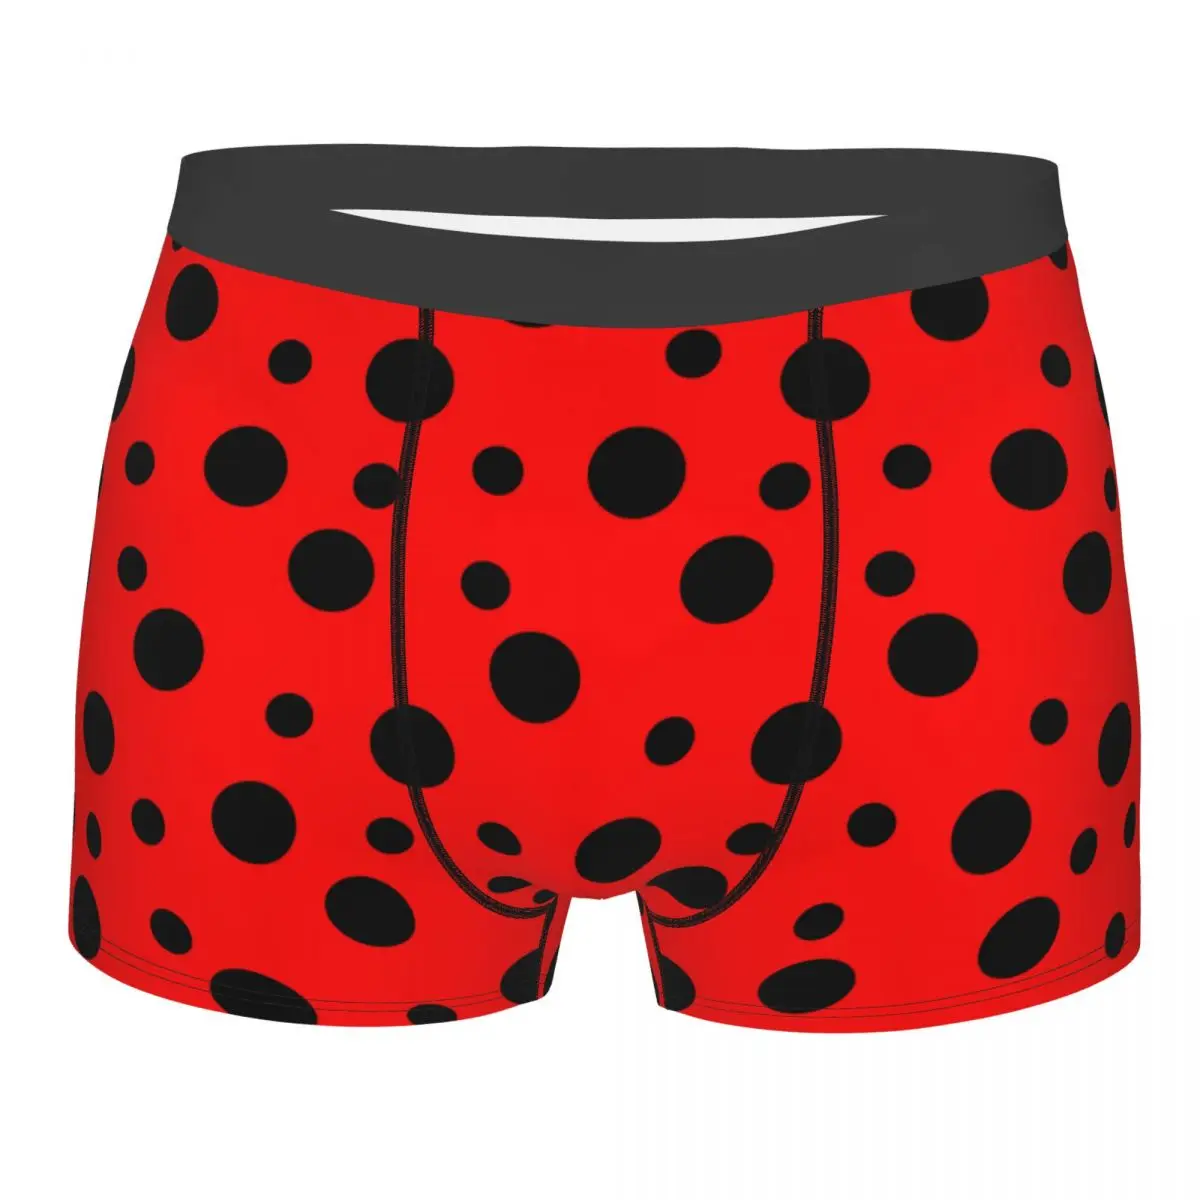 Men's Ladybug Ladybird Insect Lover Boxer Briefs Shorts Panties Soft Underwear Male Humor Underpants